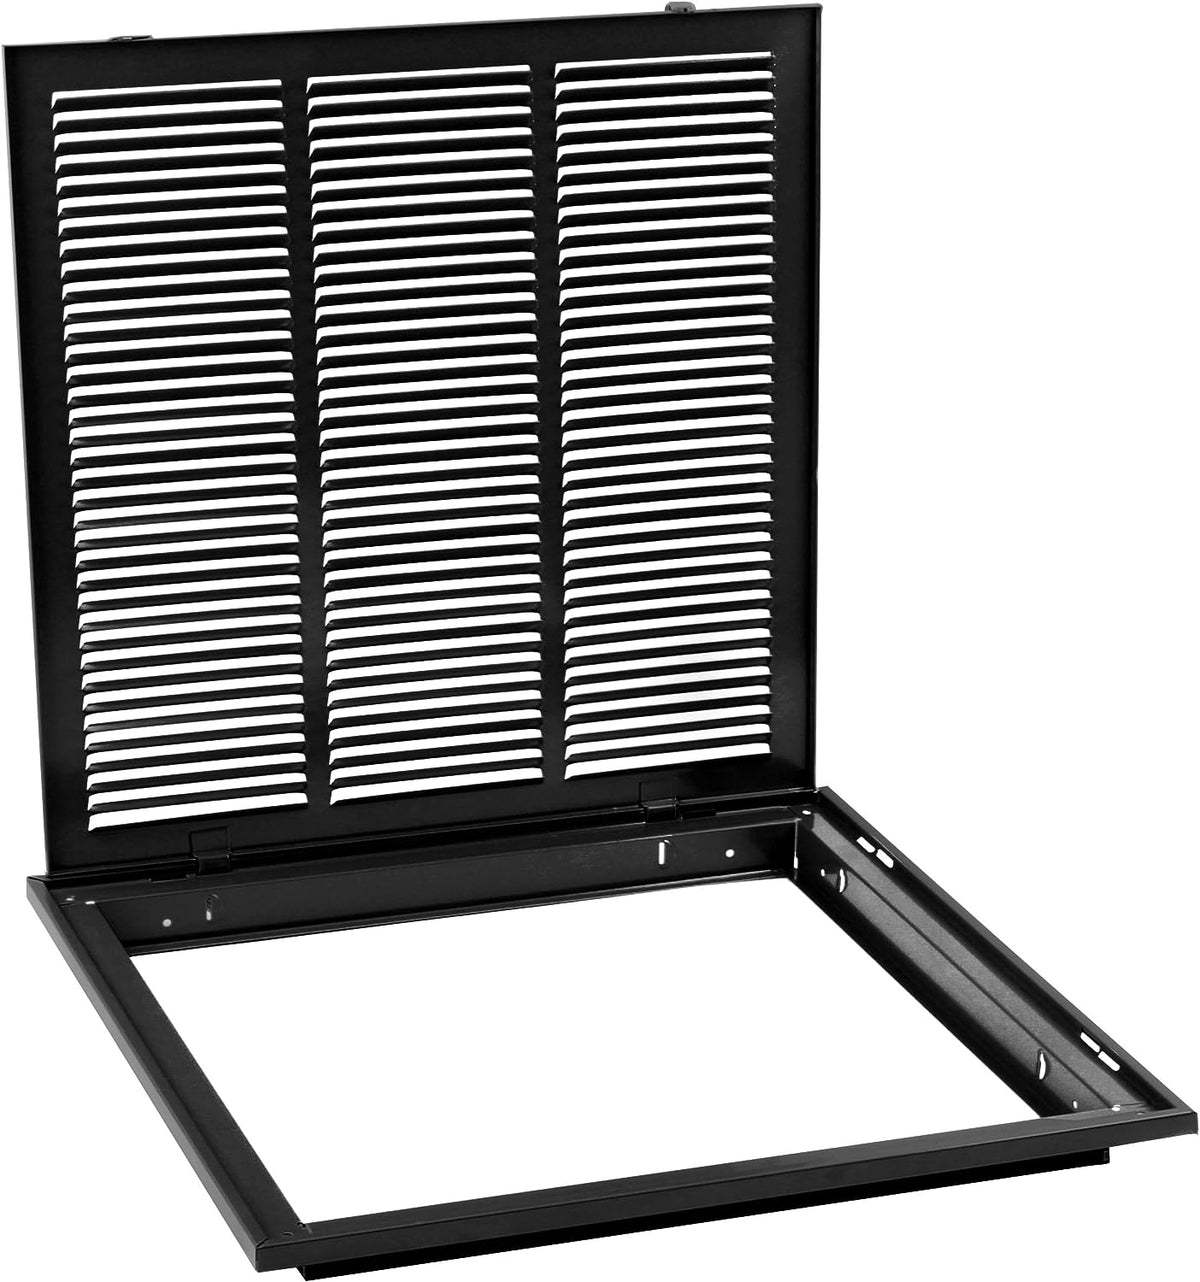 20&quot; X 12&quot; Steel Return Air Filter Grille for 1&quot; Filter - Removable Frame - Black - [Outer Dimensions: 22 5/8&quot; X 14 5/8&quot;]